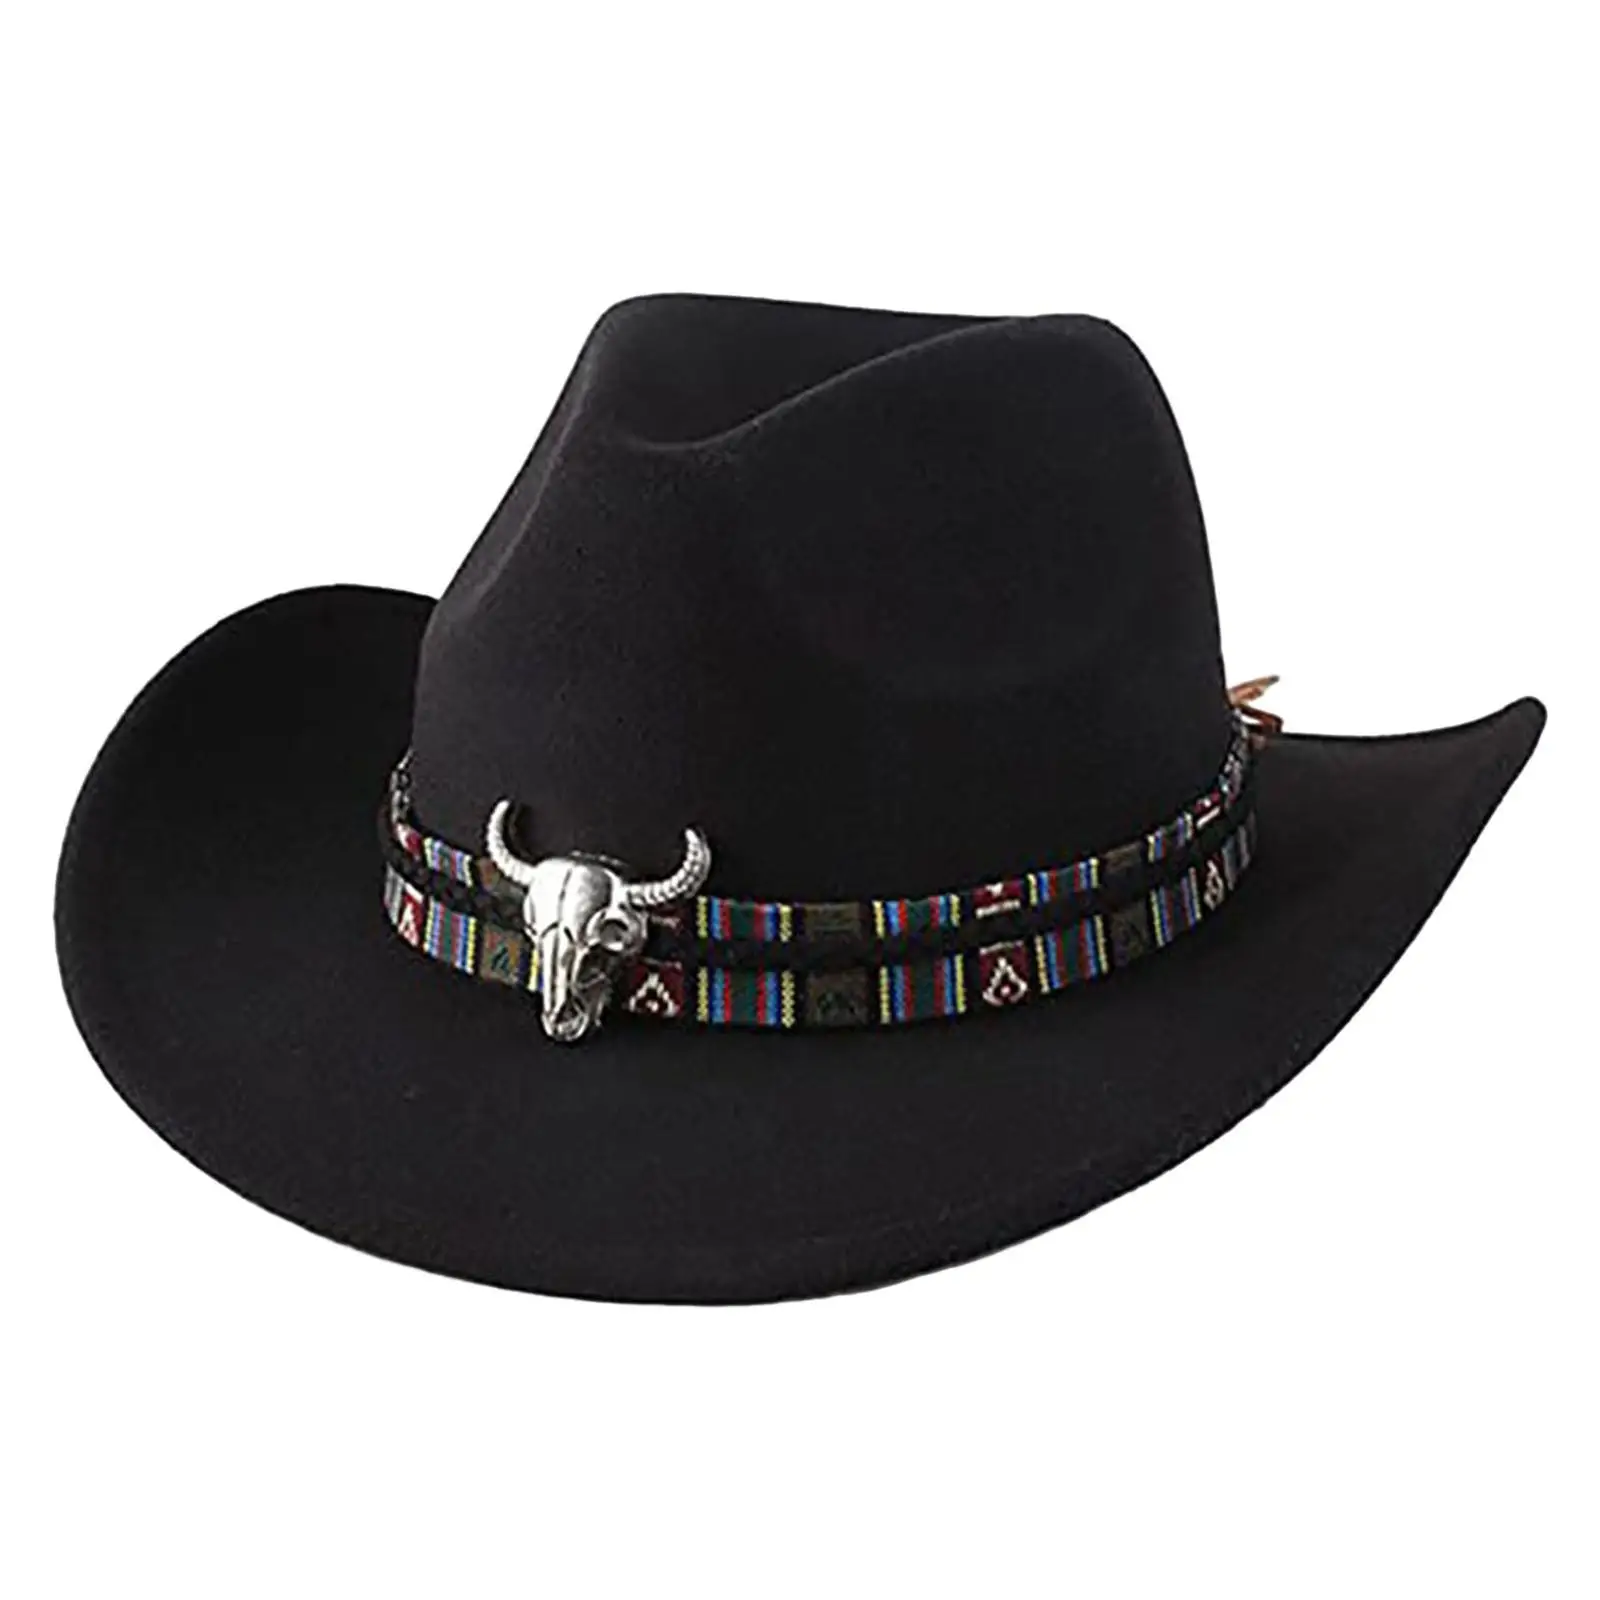 Cowgirl Hat with Pull On Closure Trendy Fashion Black for Autumn Adults Men